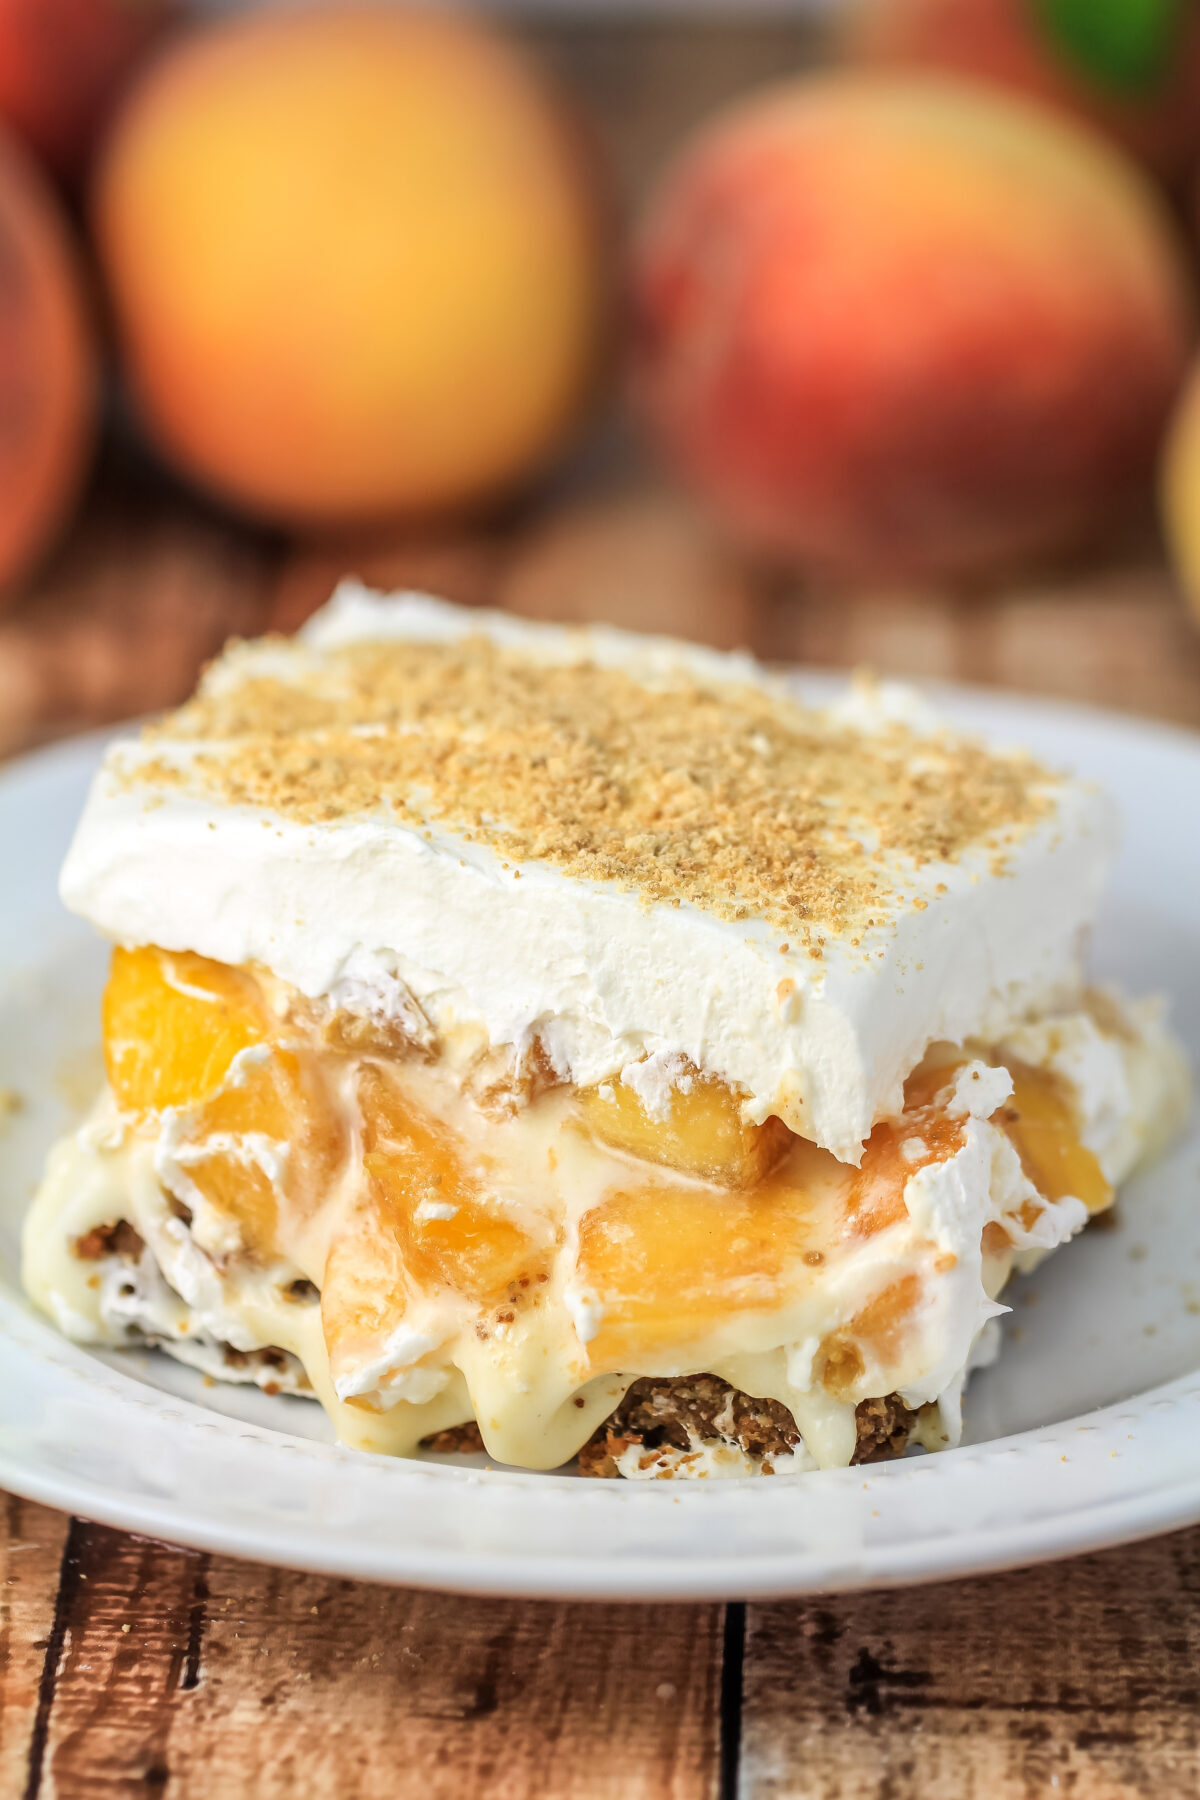 Luscious layers of pecan, cheesecake, fresh peaches and finished with a layer of whipped topping - Peach Delight with Pecan Crust is a delicious summer dessert recipe.